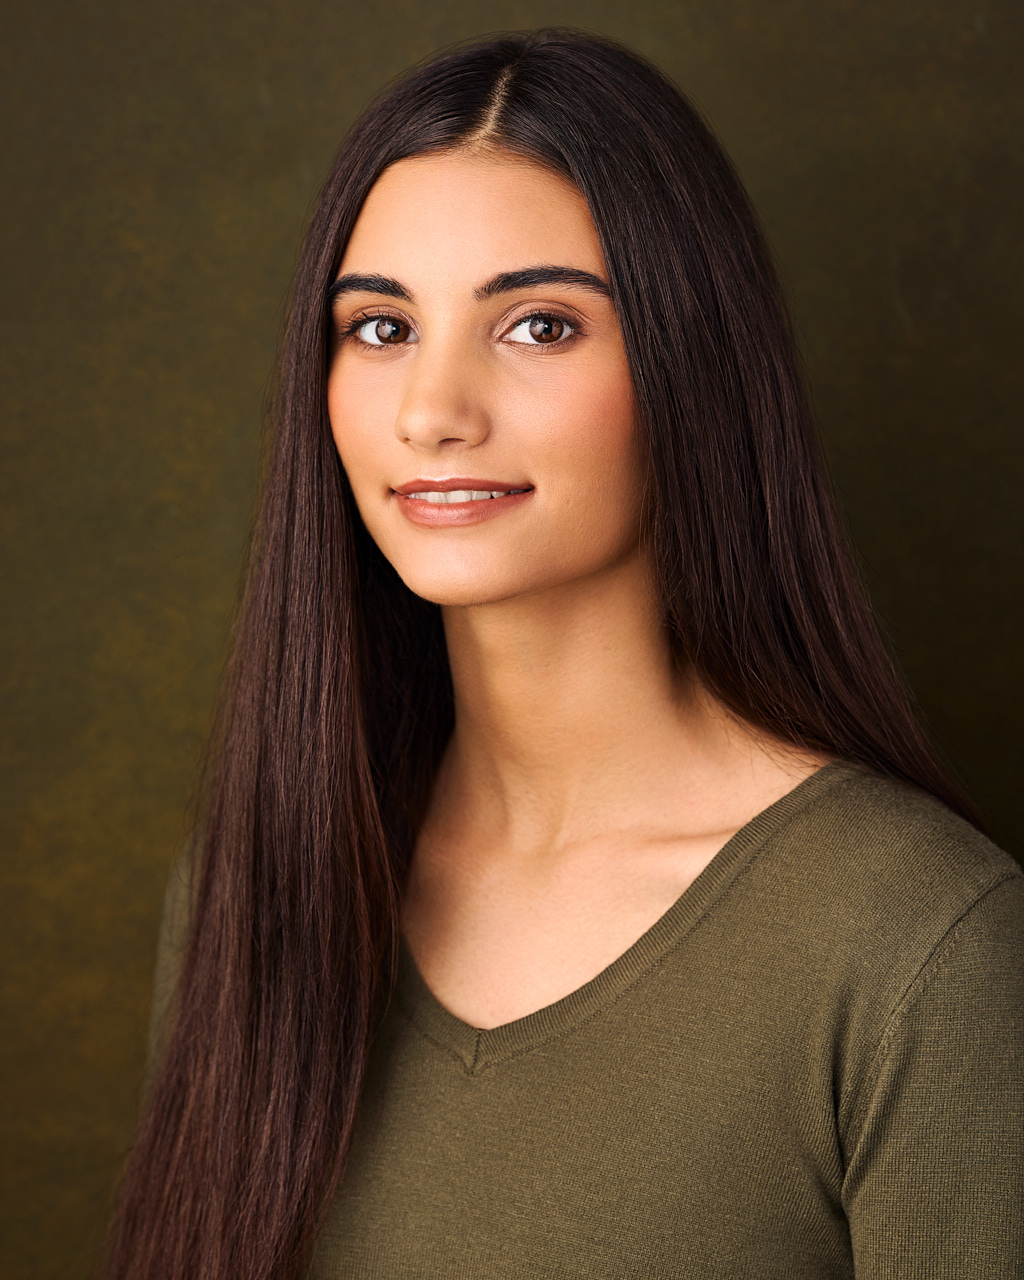 In this headshot, a young woman is wearing a green sweater.